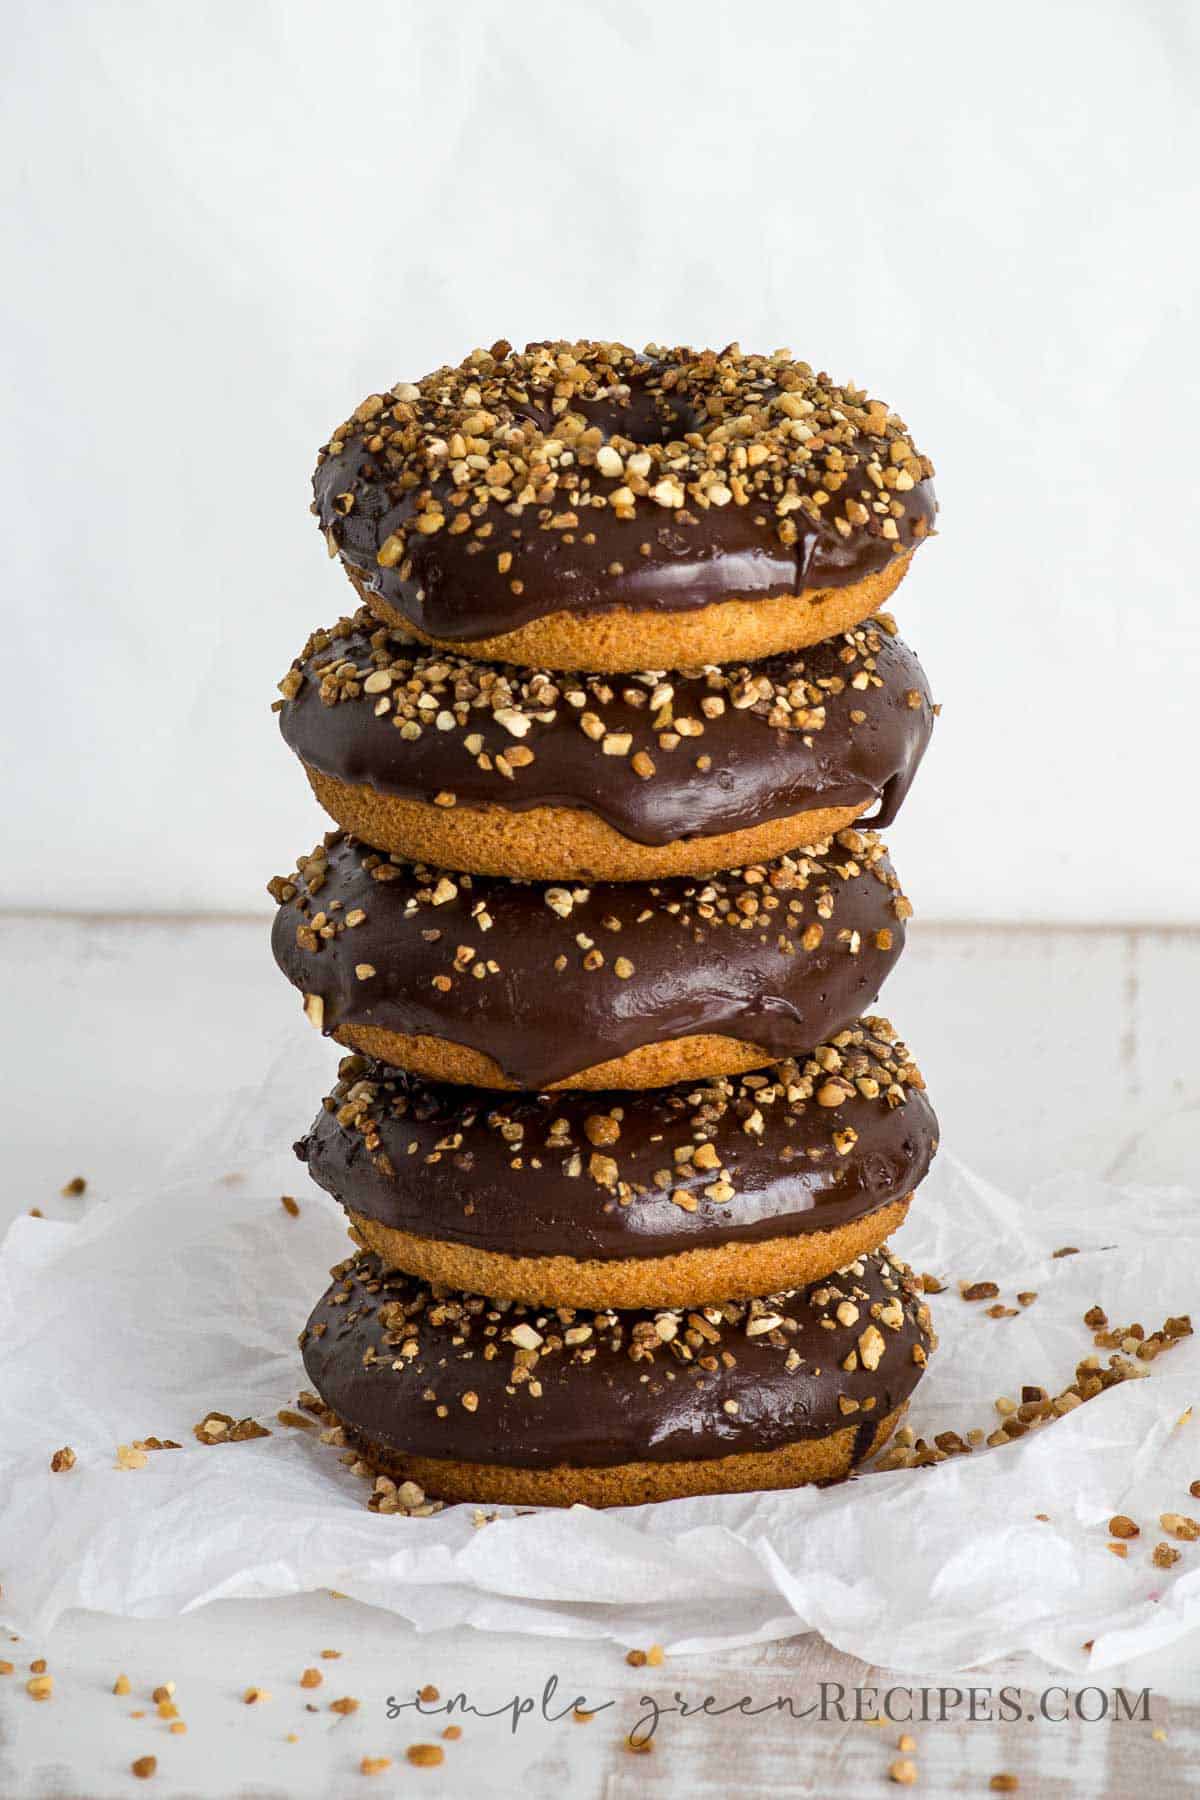 stack of donuts, frosted with glaze chocolate and crunchy almonds, on a parchment paper